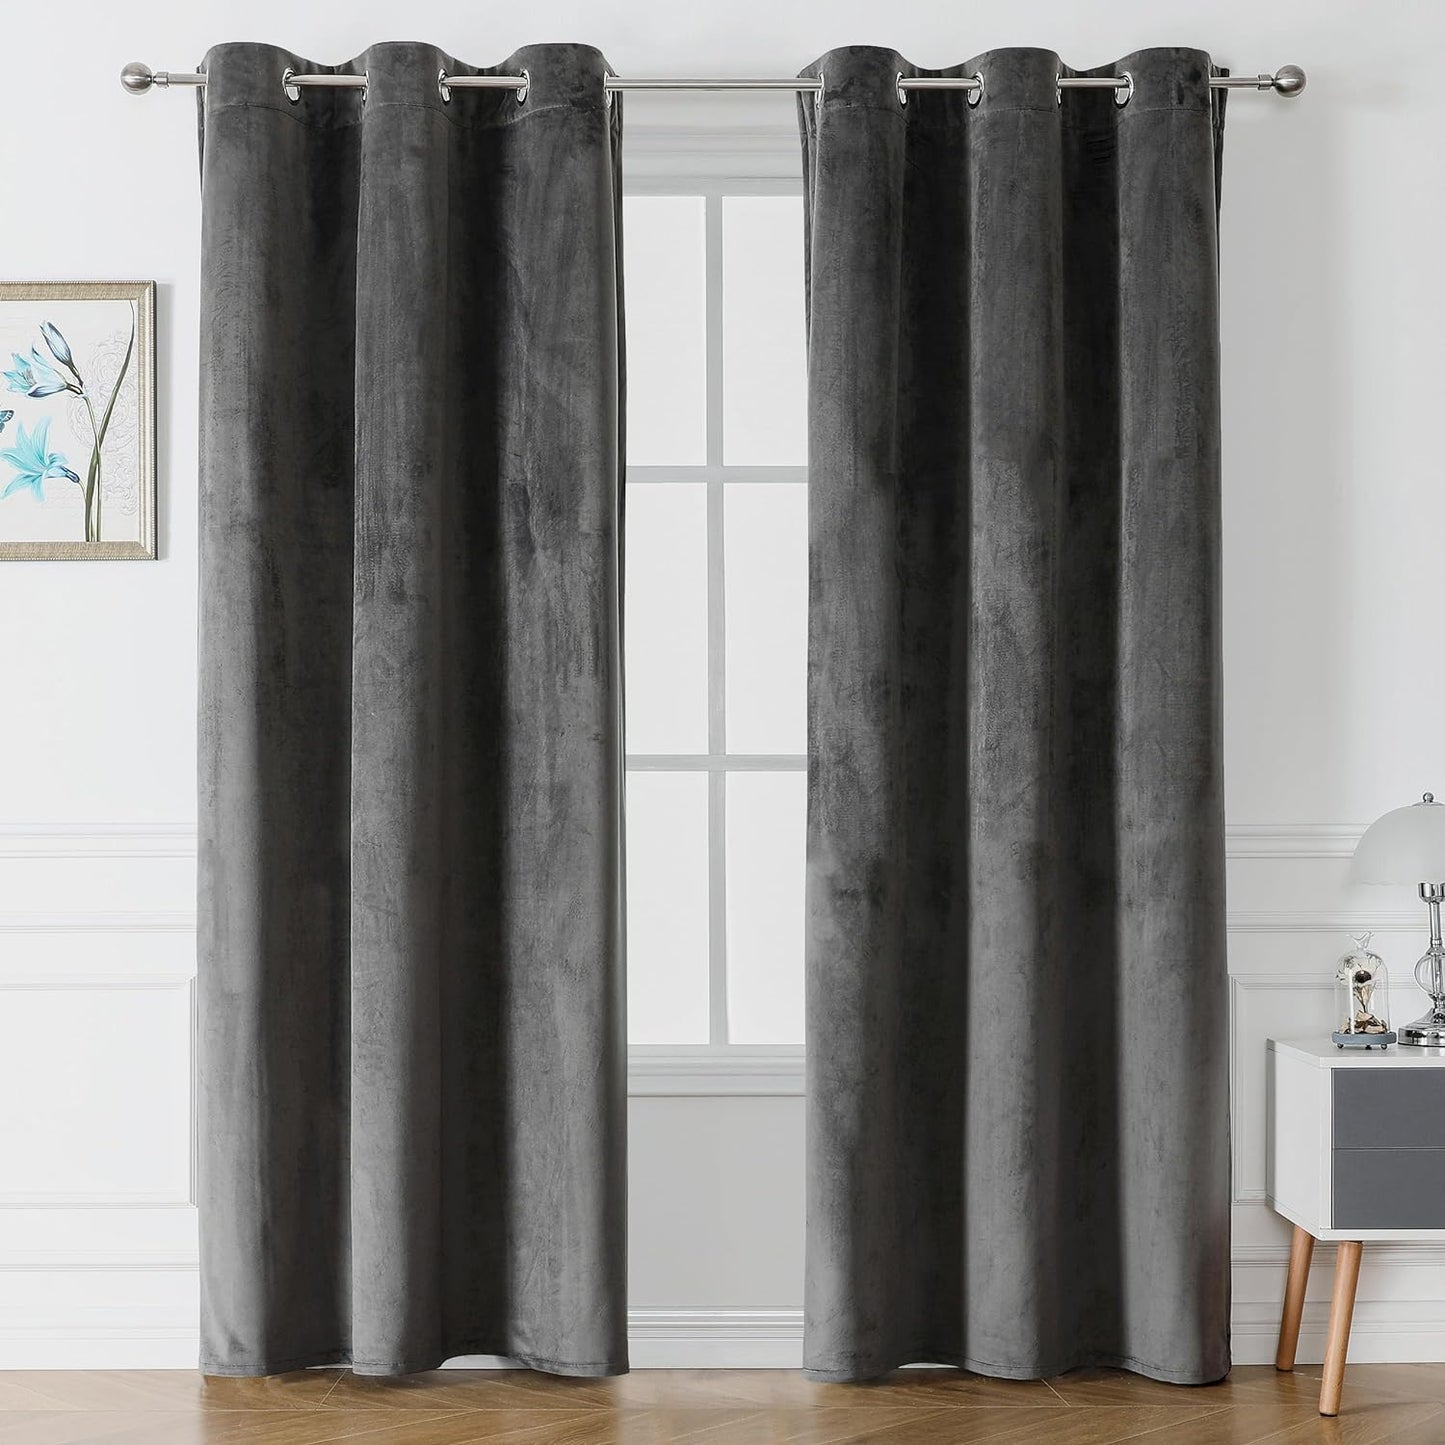 Victree Velvet Curtains for Bedroom, Blackout Curtains 52 X 84 Inch Length - Room Darkening Sun Light Blocking Grommet Window Drapes for Living Room, 2 Panels, Navy  Victree Dark Grey 42 X 72 Inches 